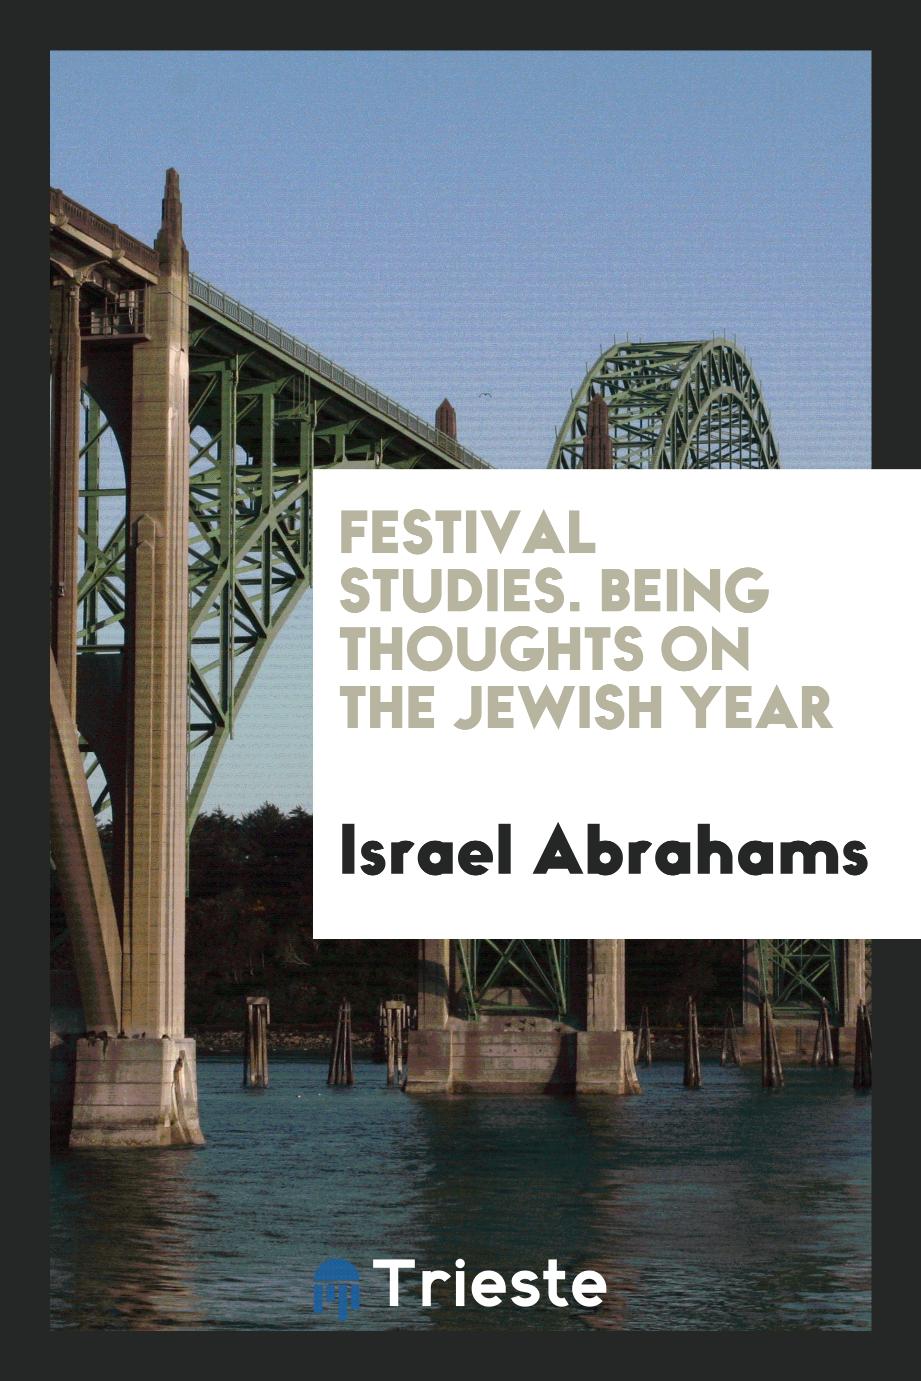 Festival studies. Being thoughts on the Jewish year